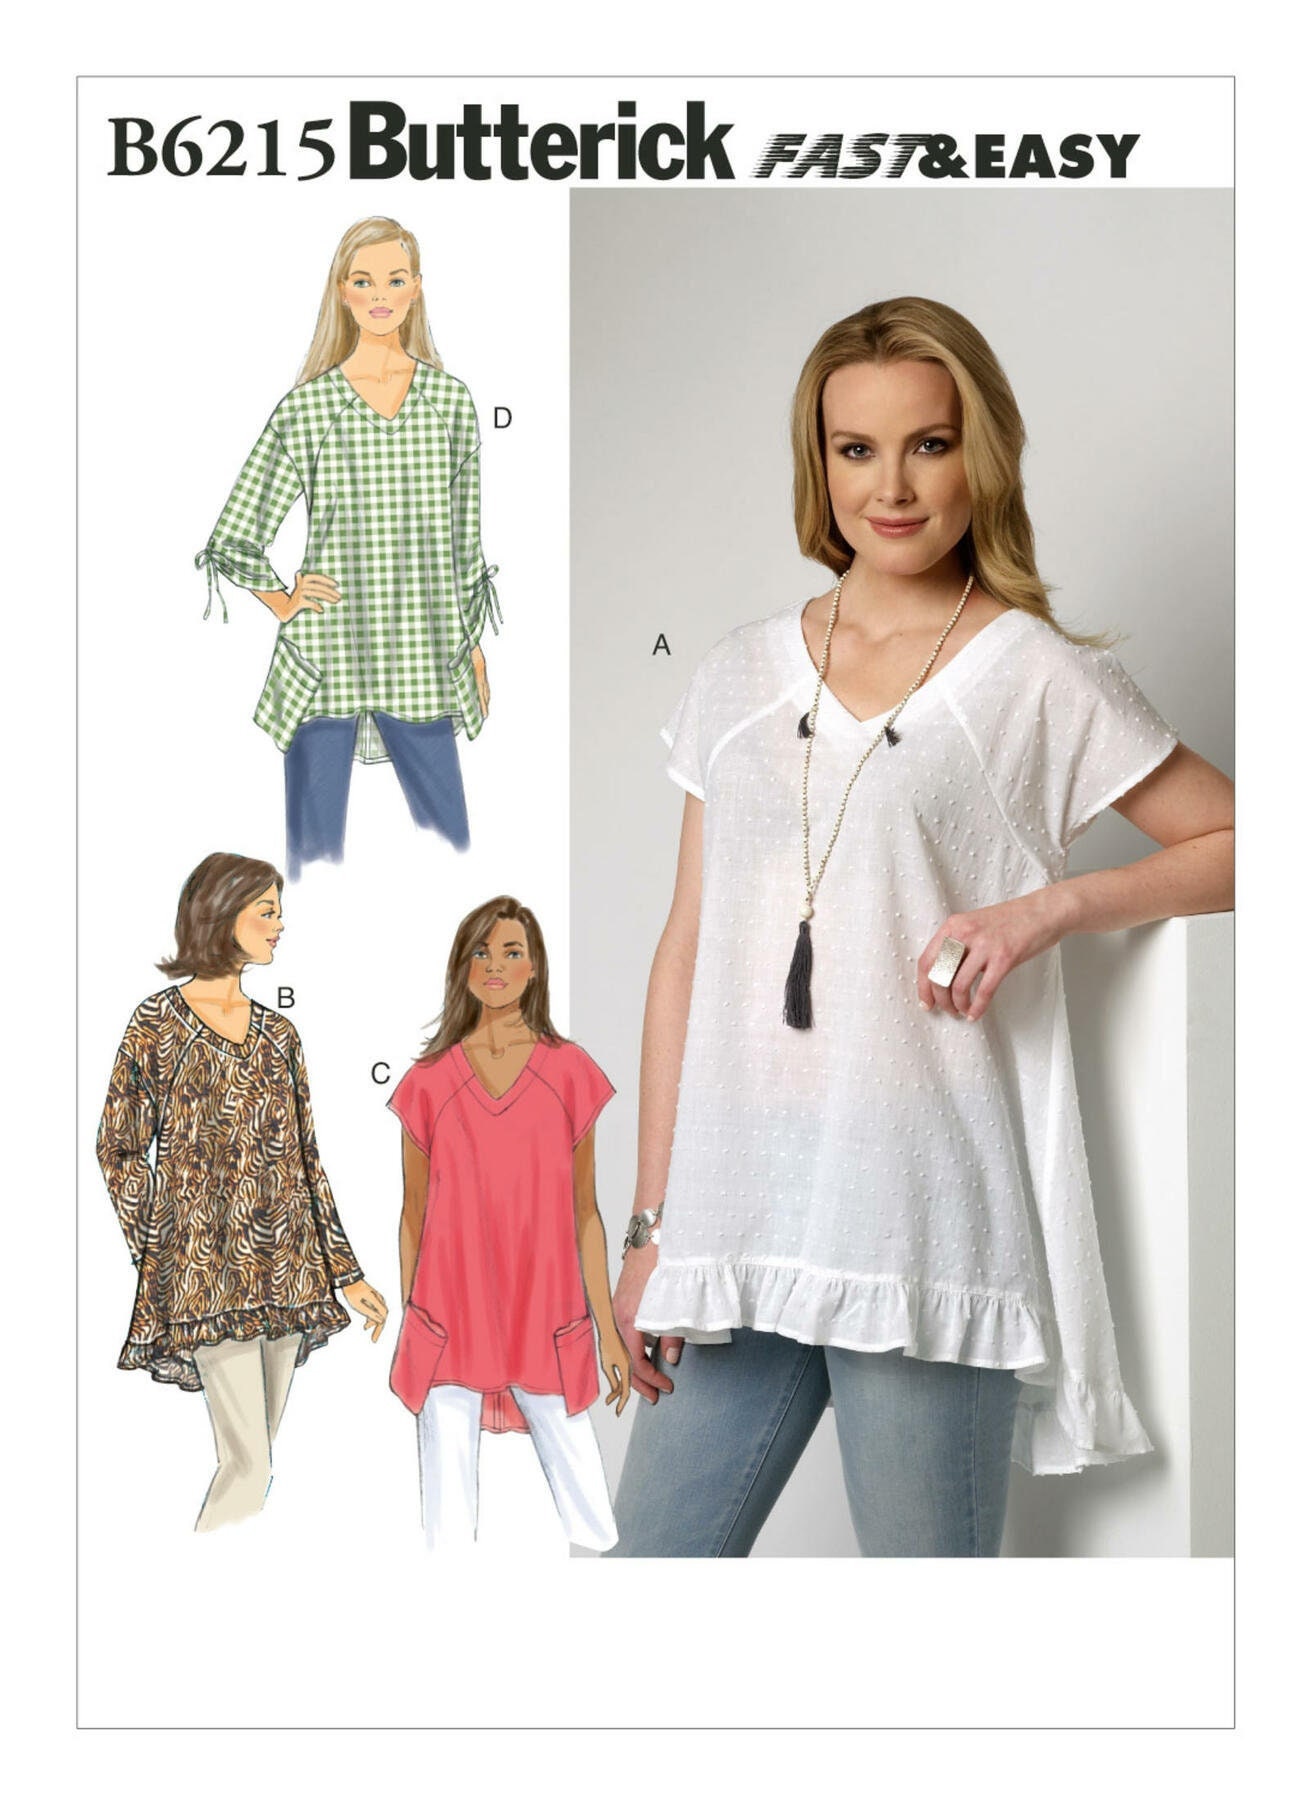 N6439, New Look Sewing Pattern Misses' Knit Tunics with Leggings